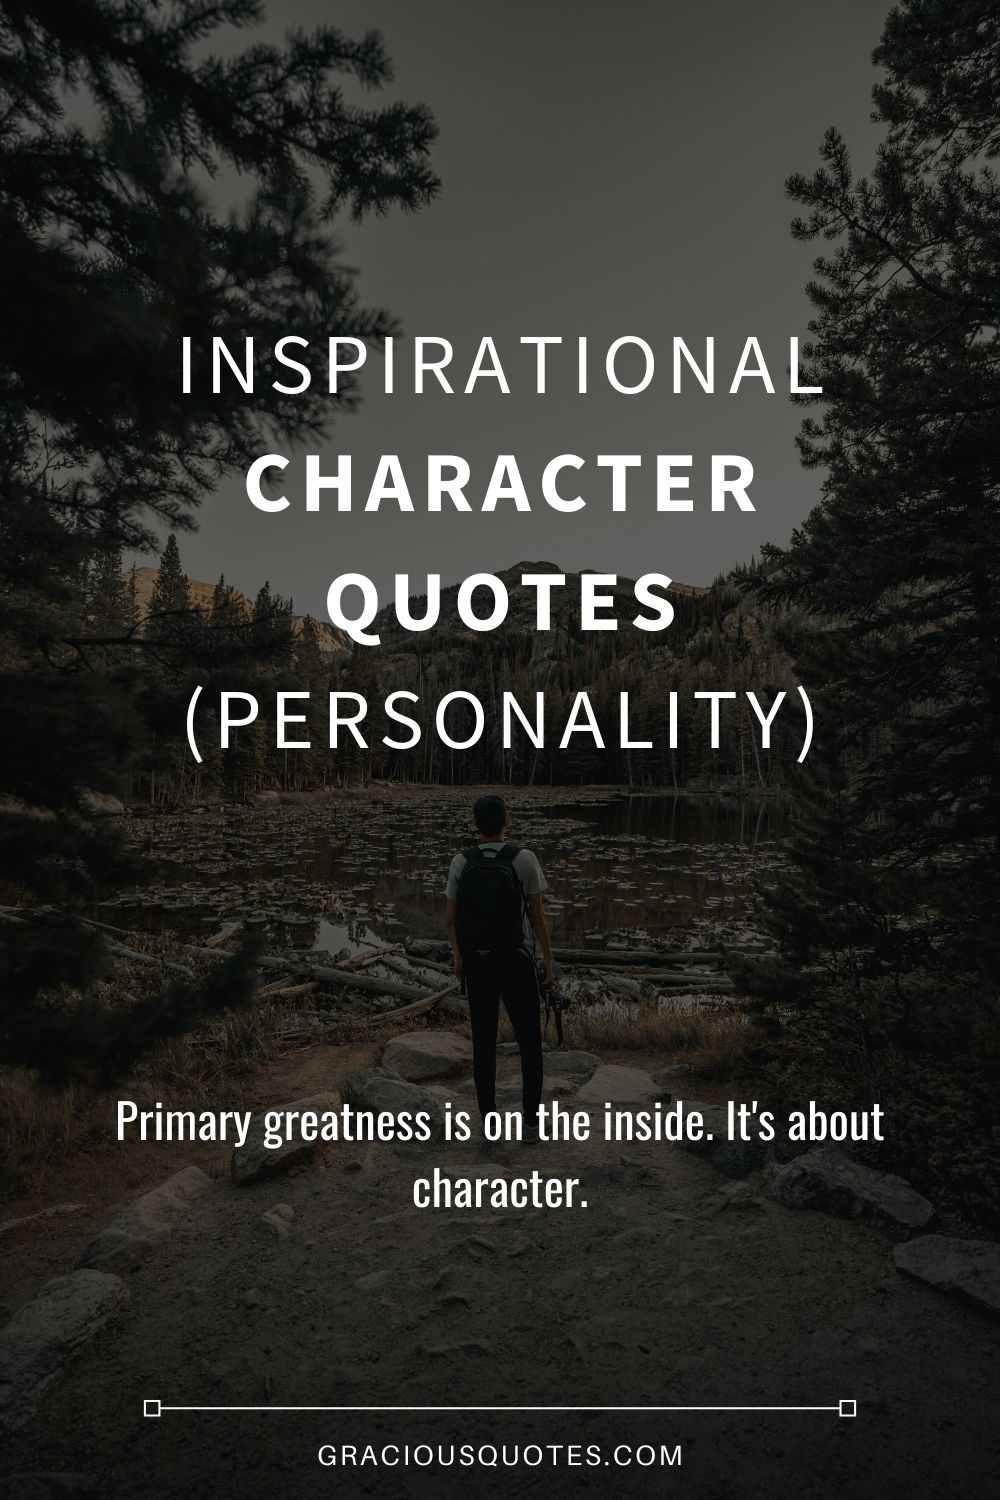 Inspirational Character Quotes (PERSONALITY) - Gracious Quotes